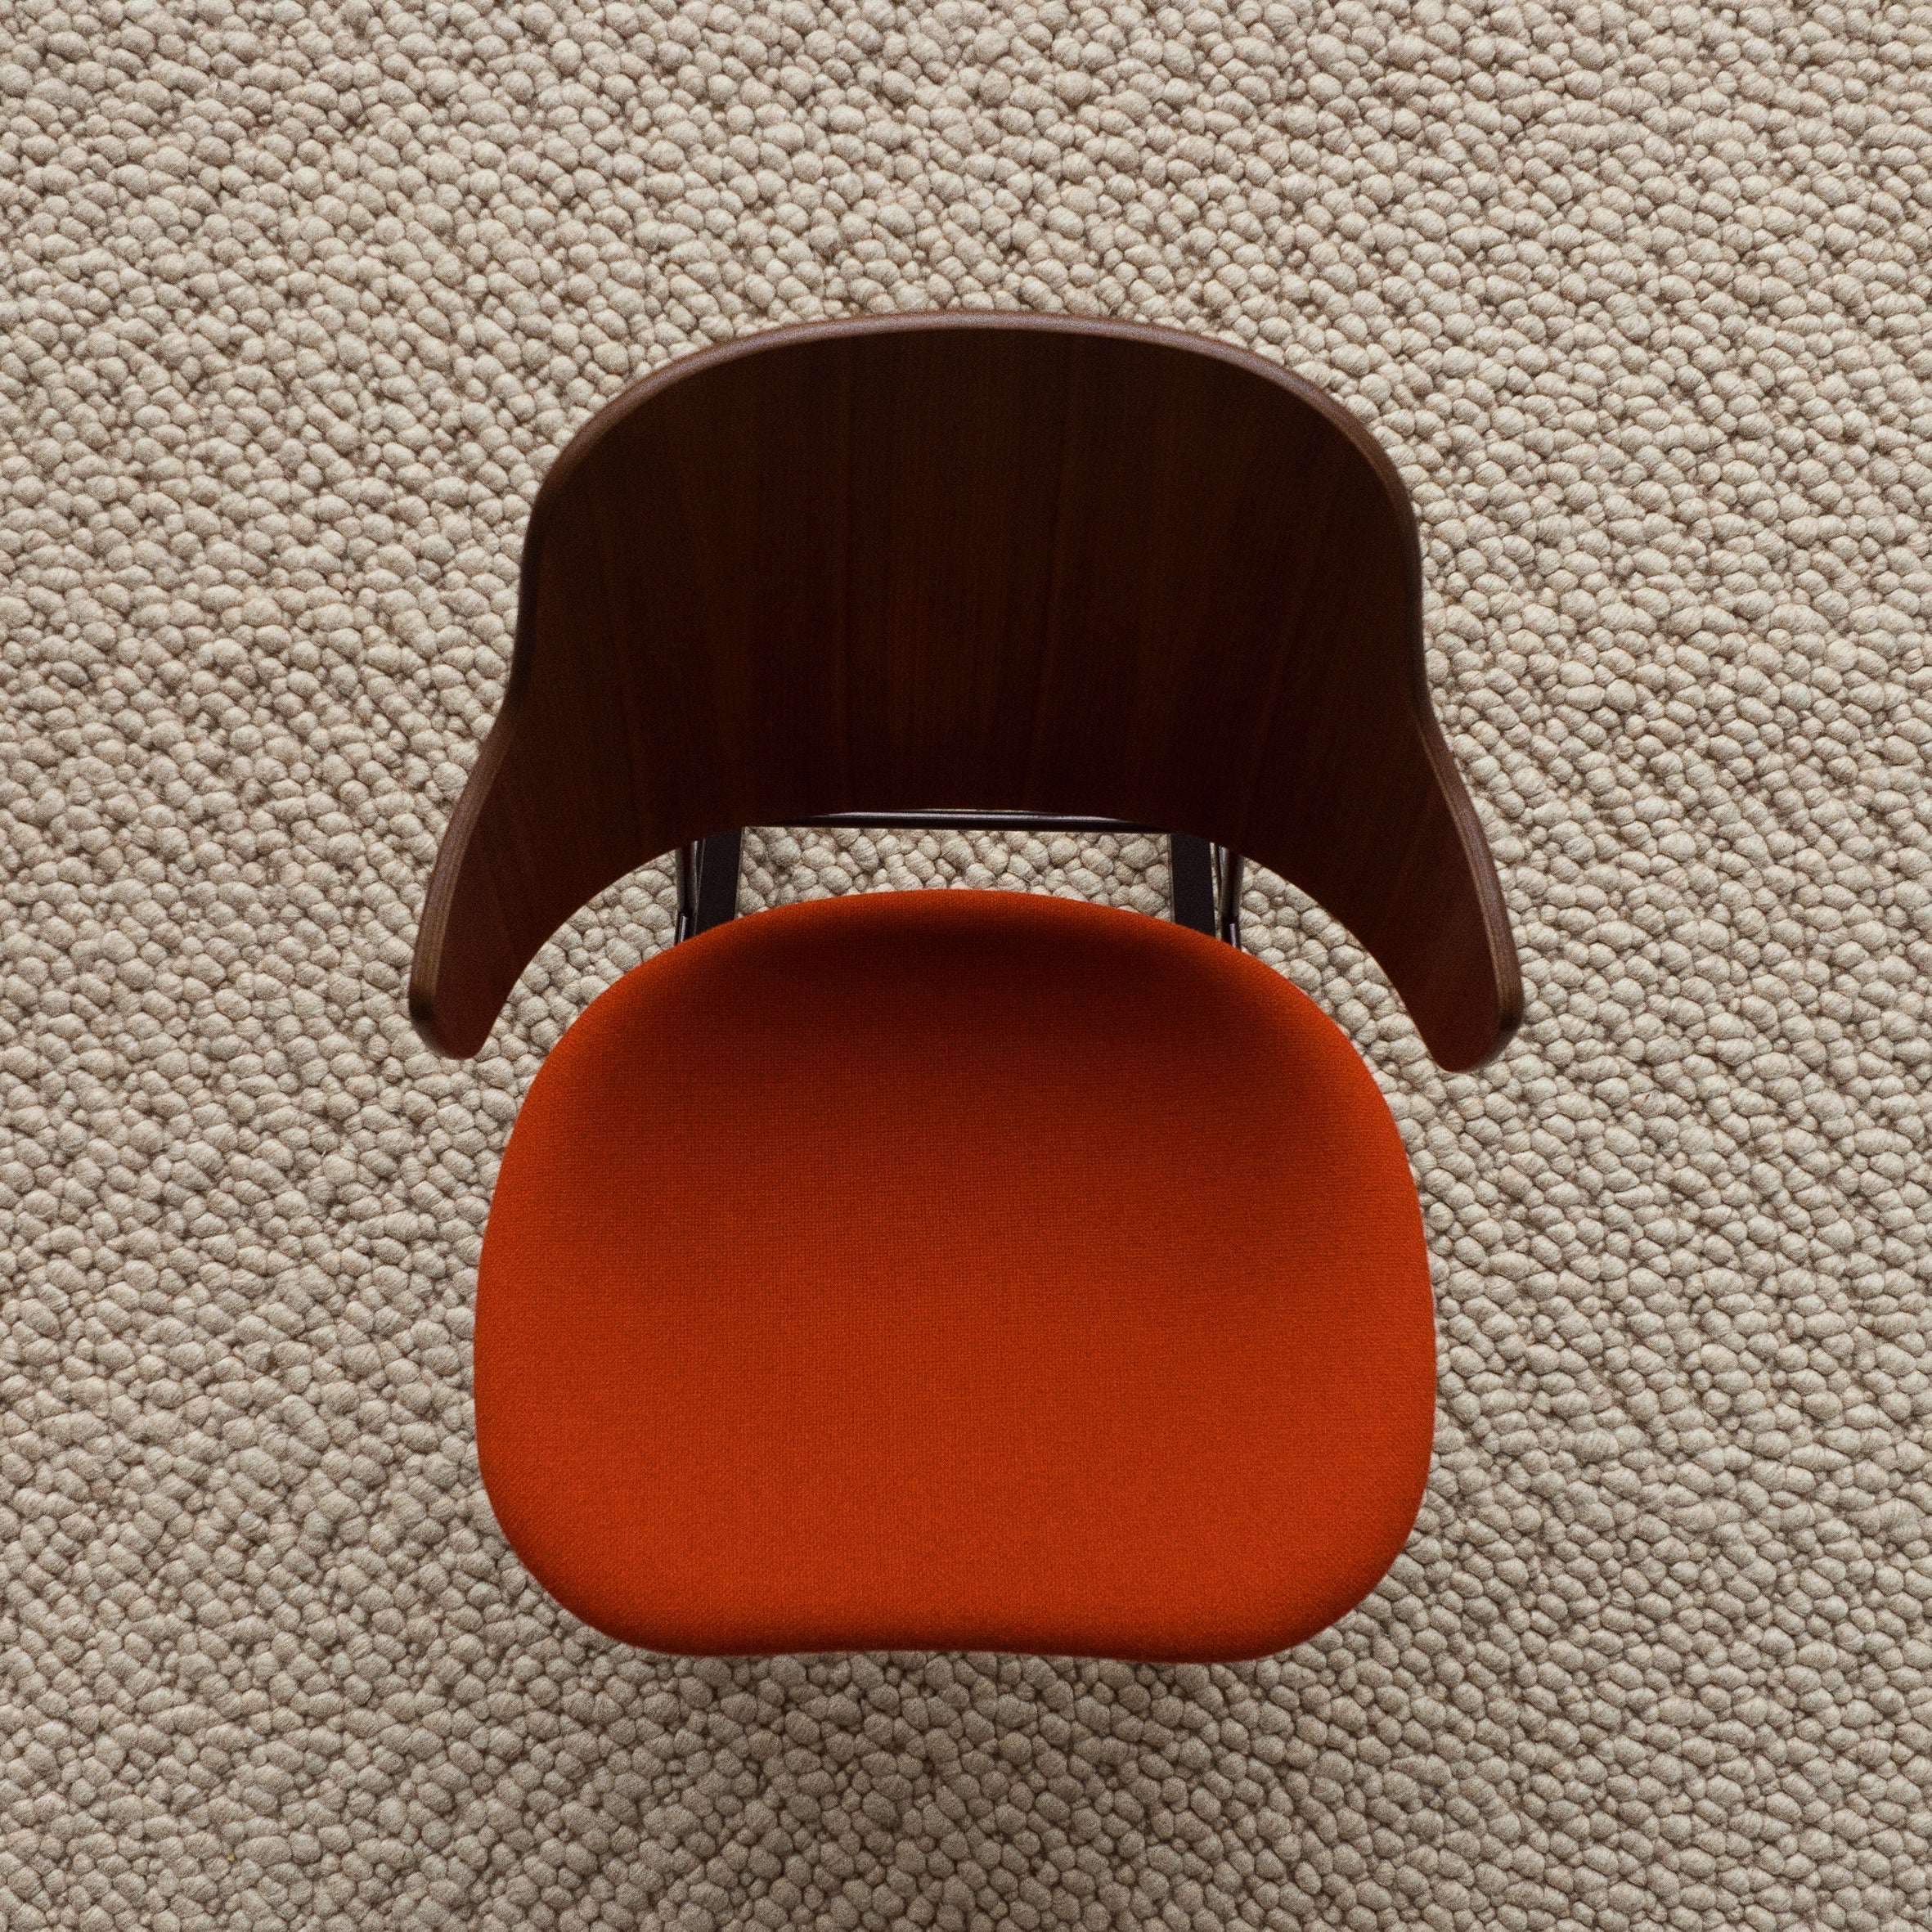 The Penguin Chair